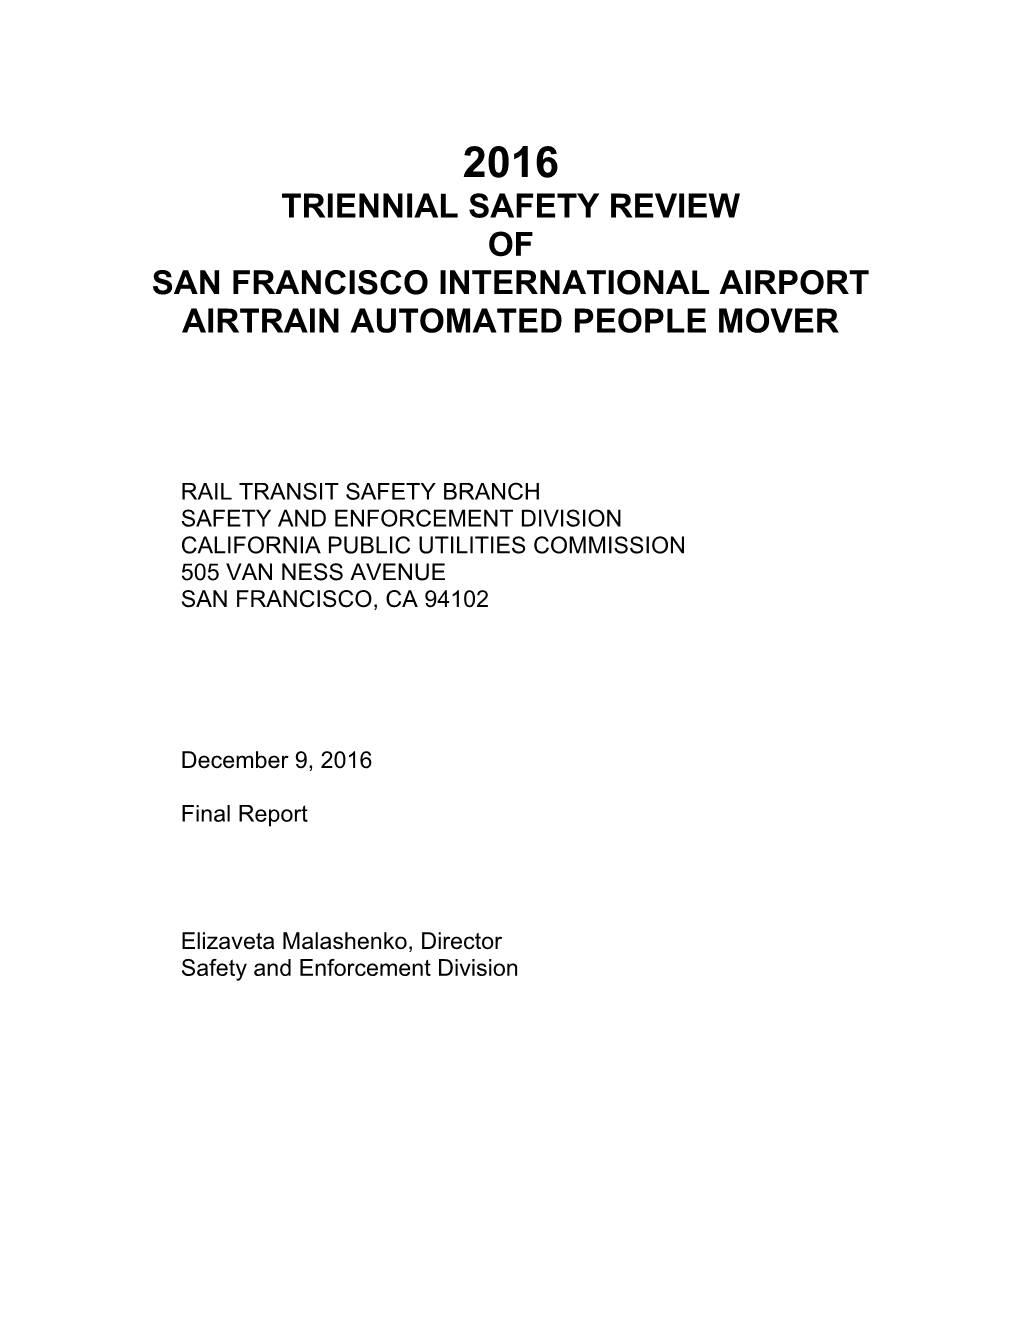 2011 Cpuc System Safety Review Checklist For